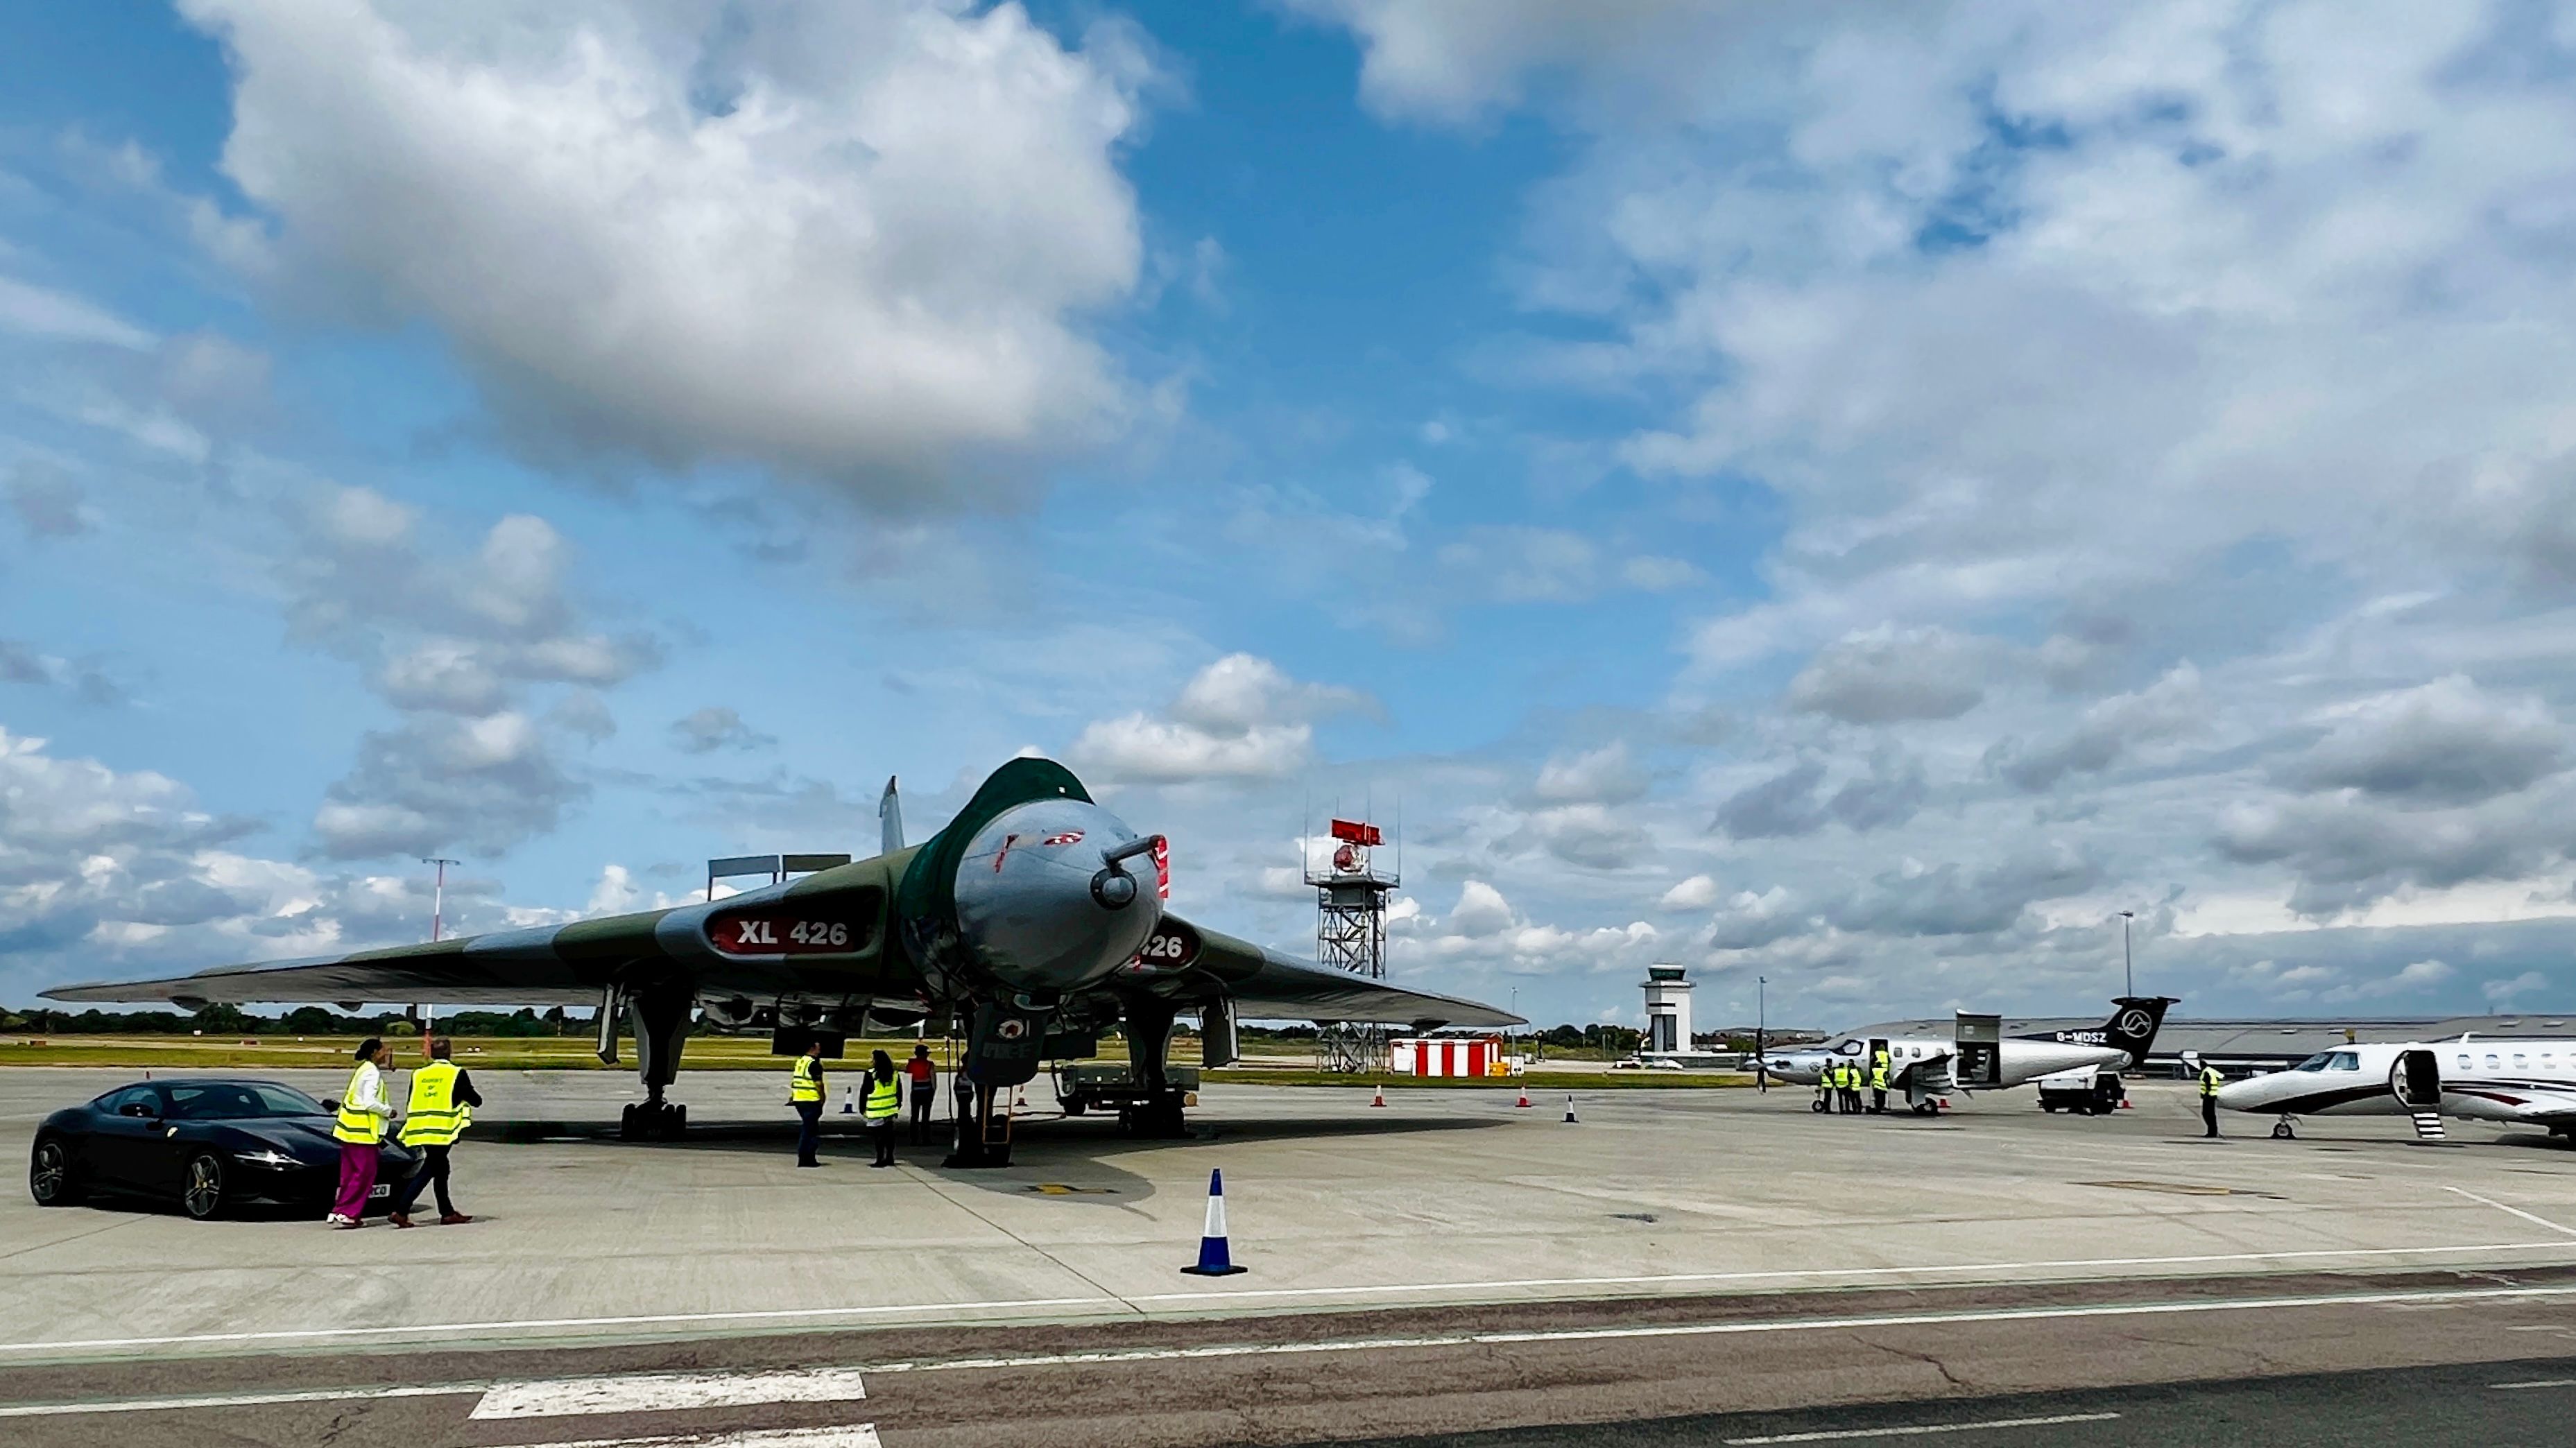 An Avro Vulcan on display at London Southend Airport.